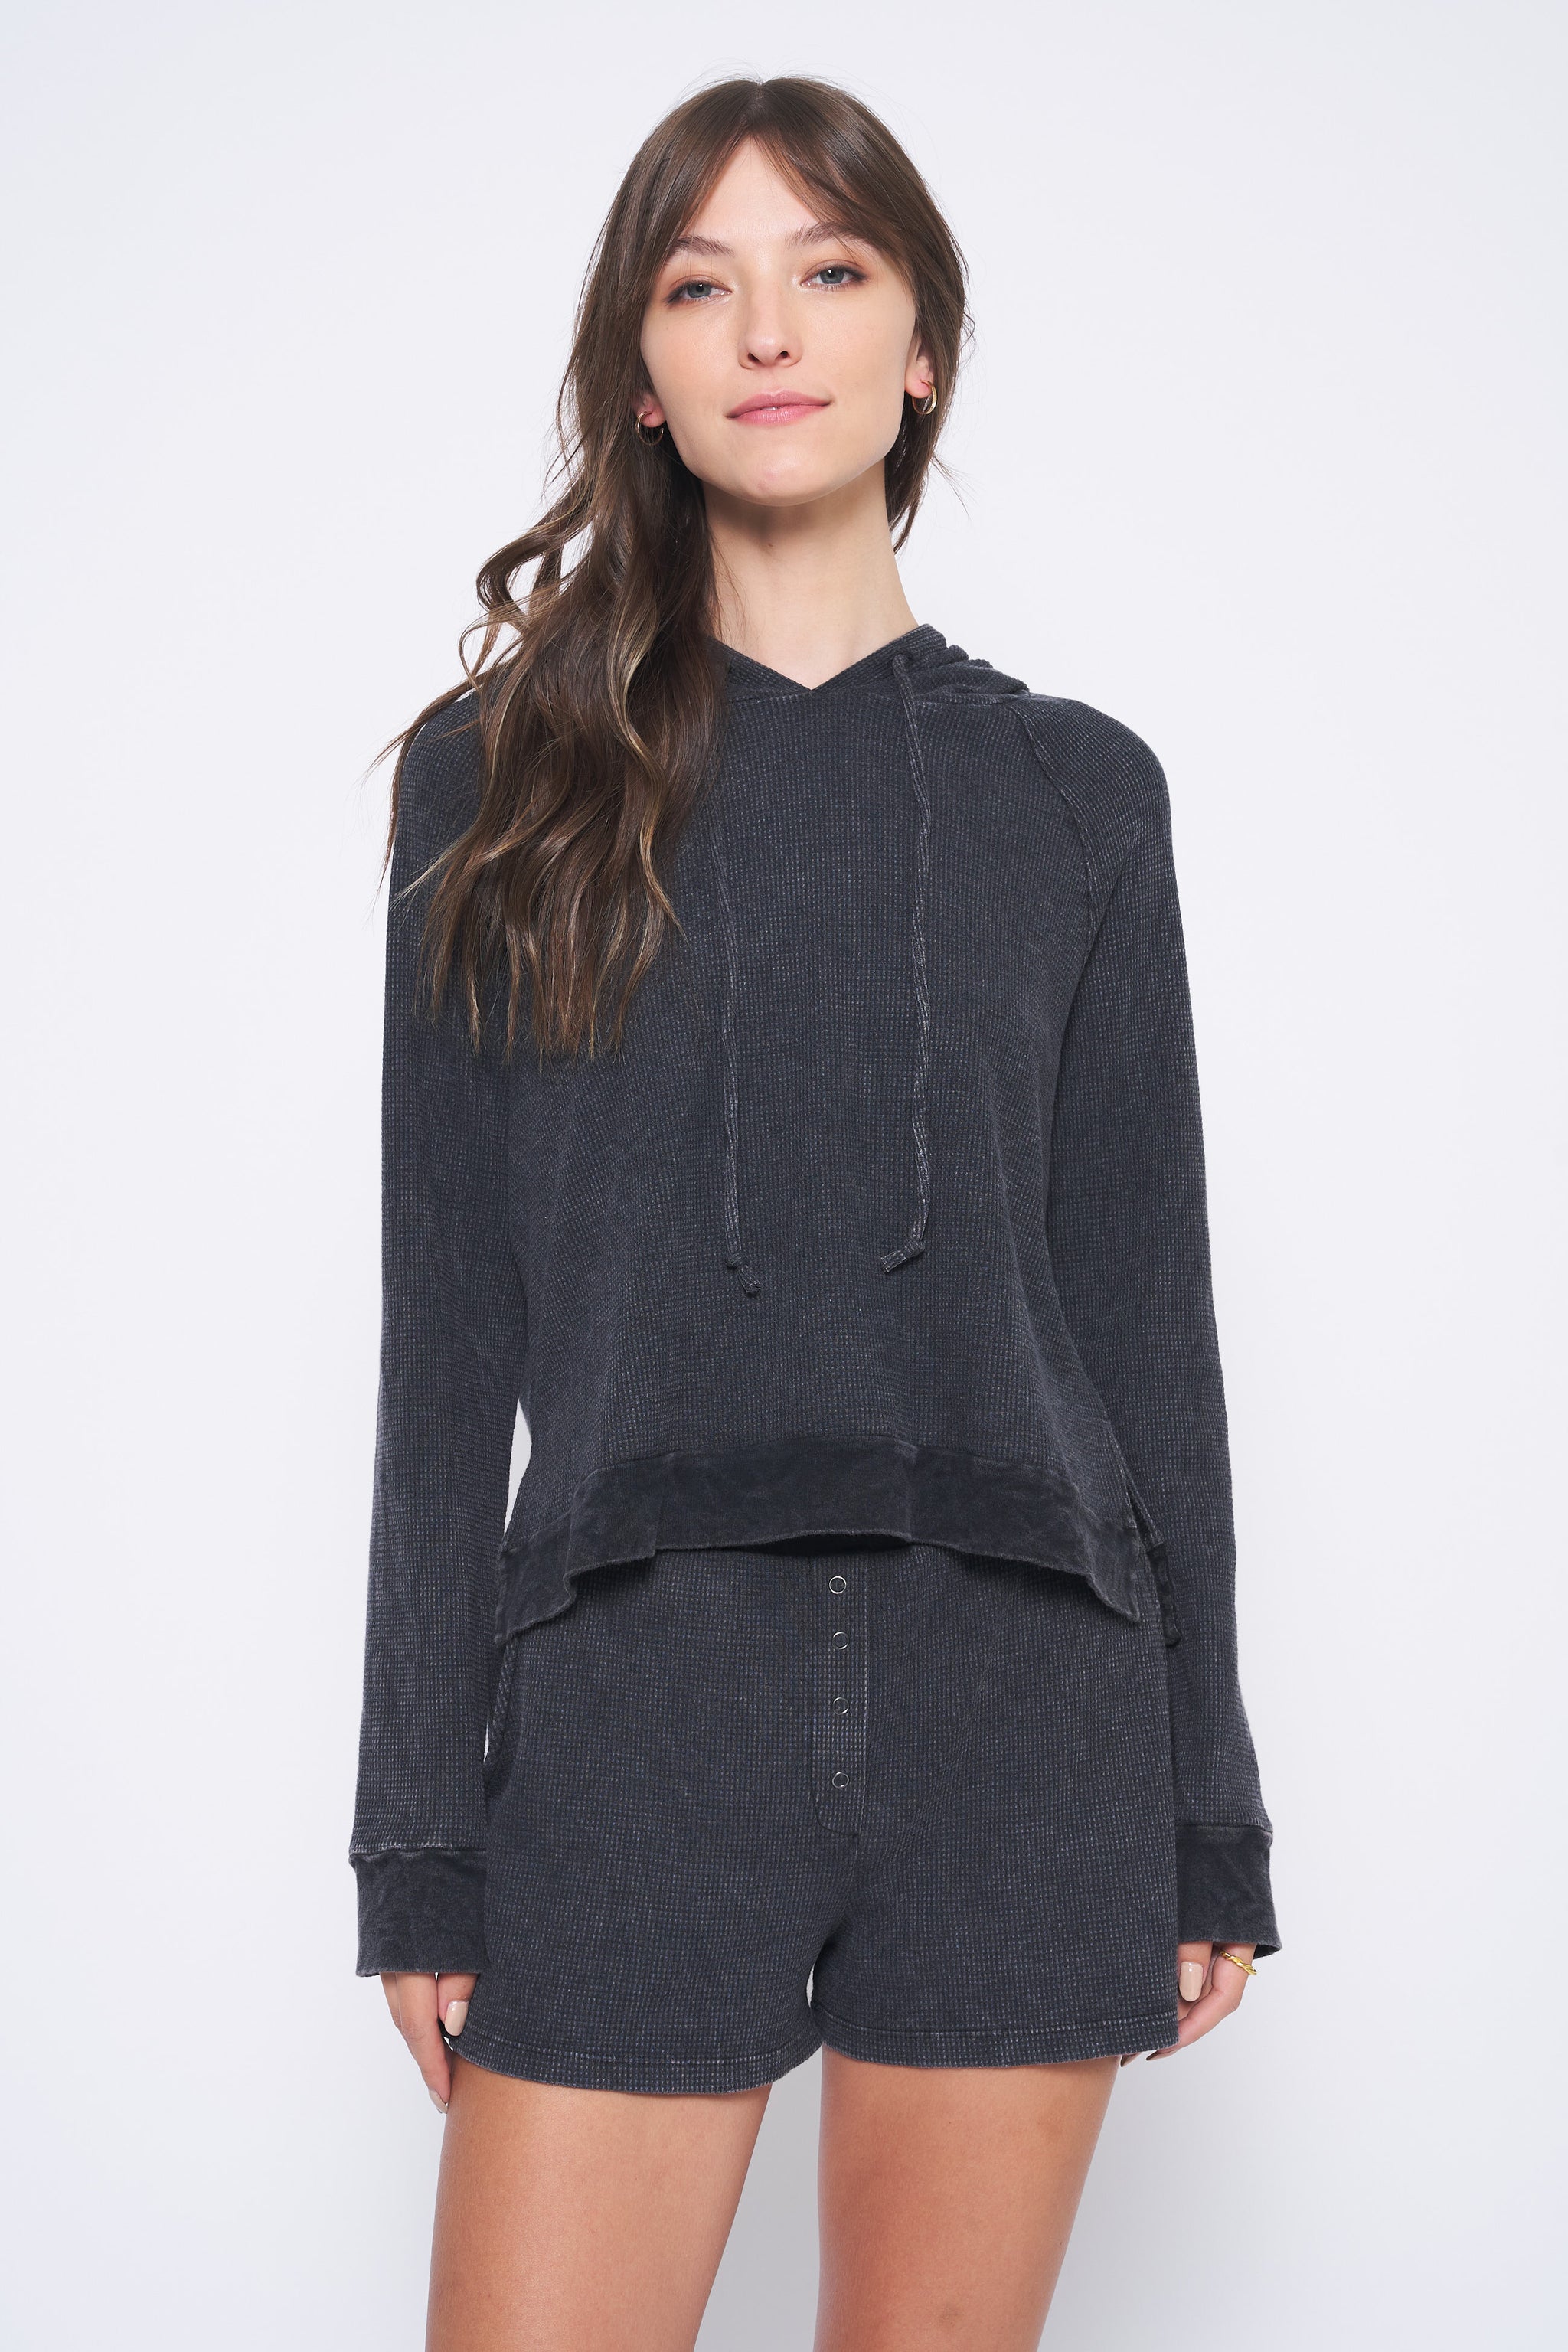 Project Social T Charcoal Grey Gemma Thermal Hoodie